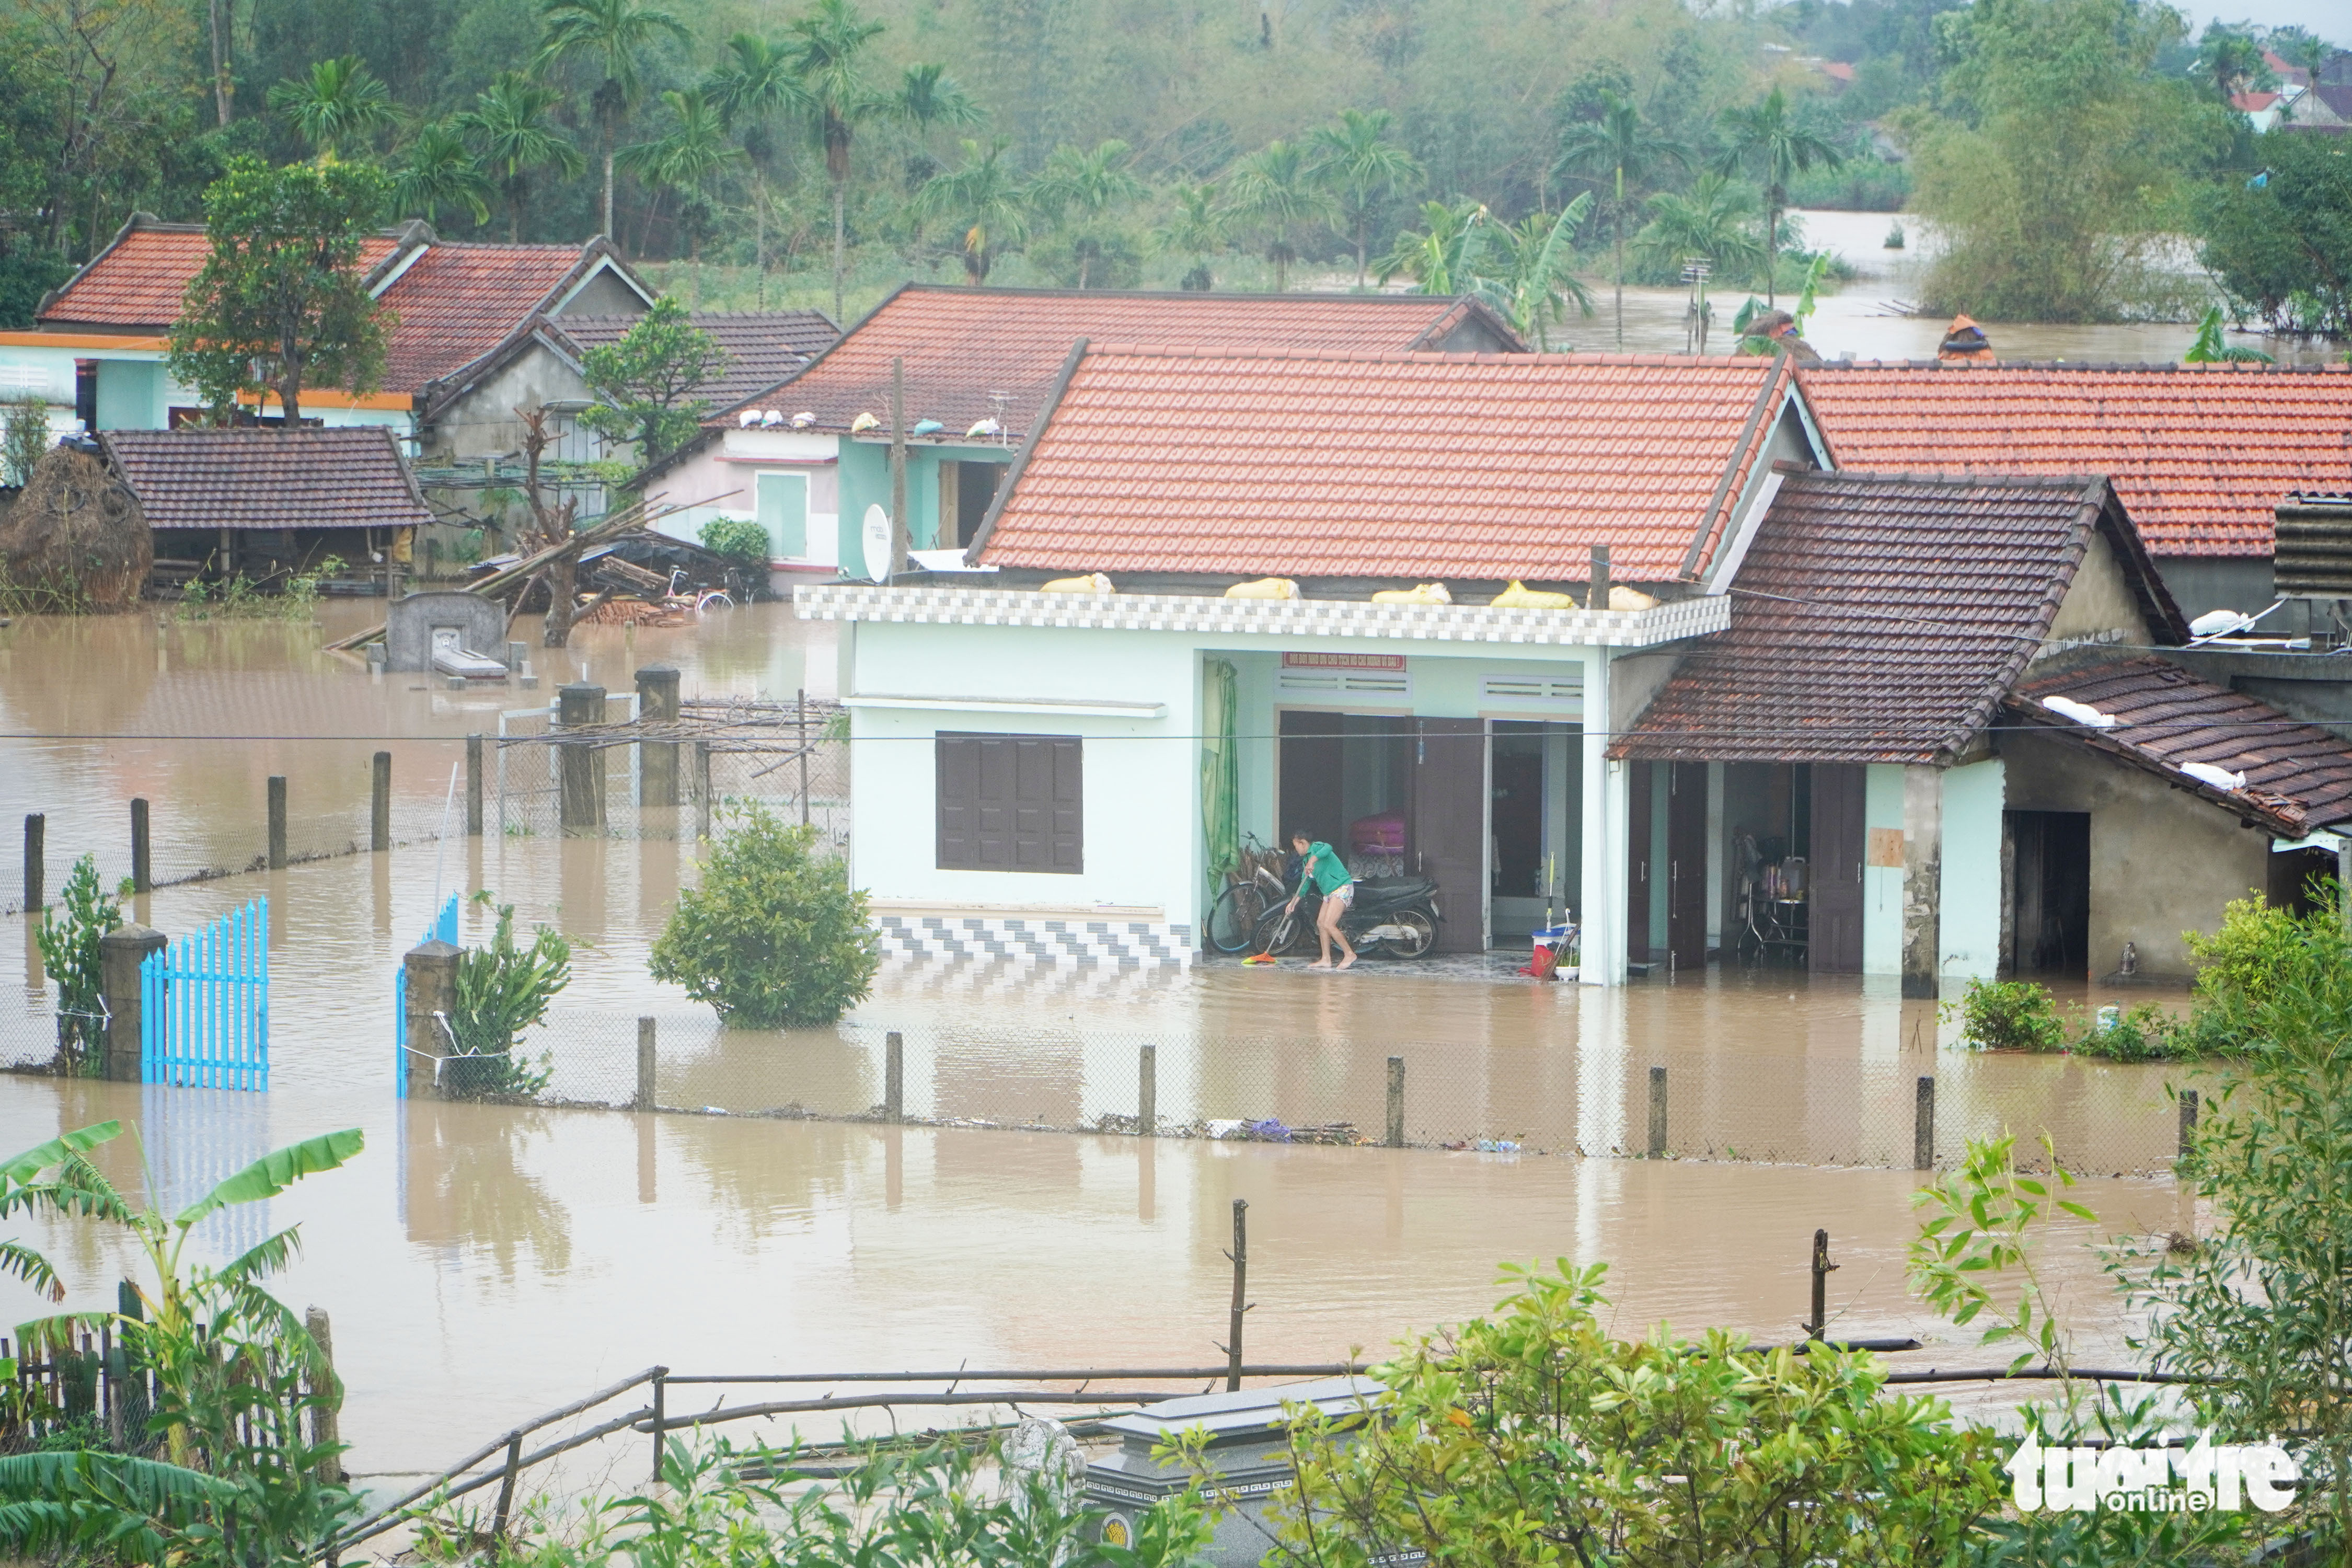 A flooded neighborhood in Quang Nam Province, Vietnam, October 10, 2022. Photo: Le Trung / Tuoi Tre